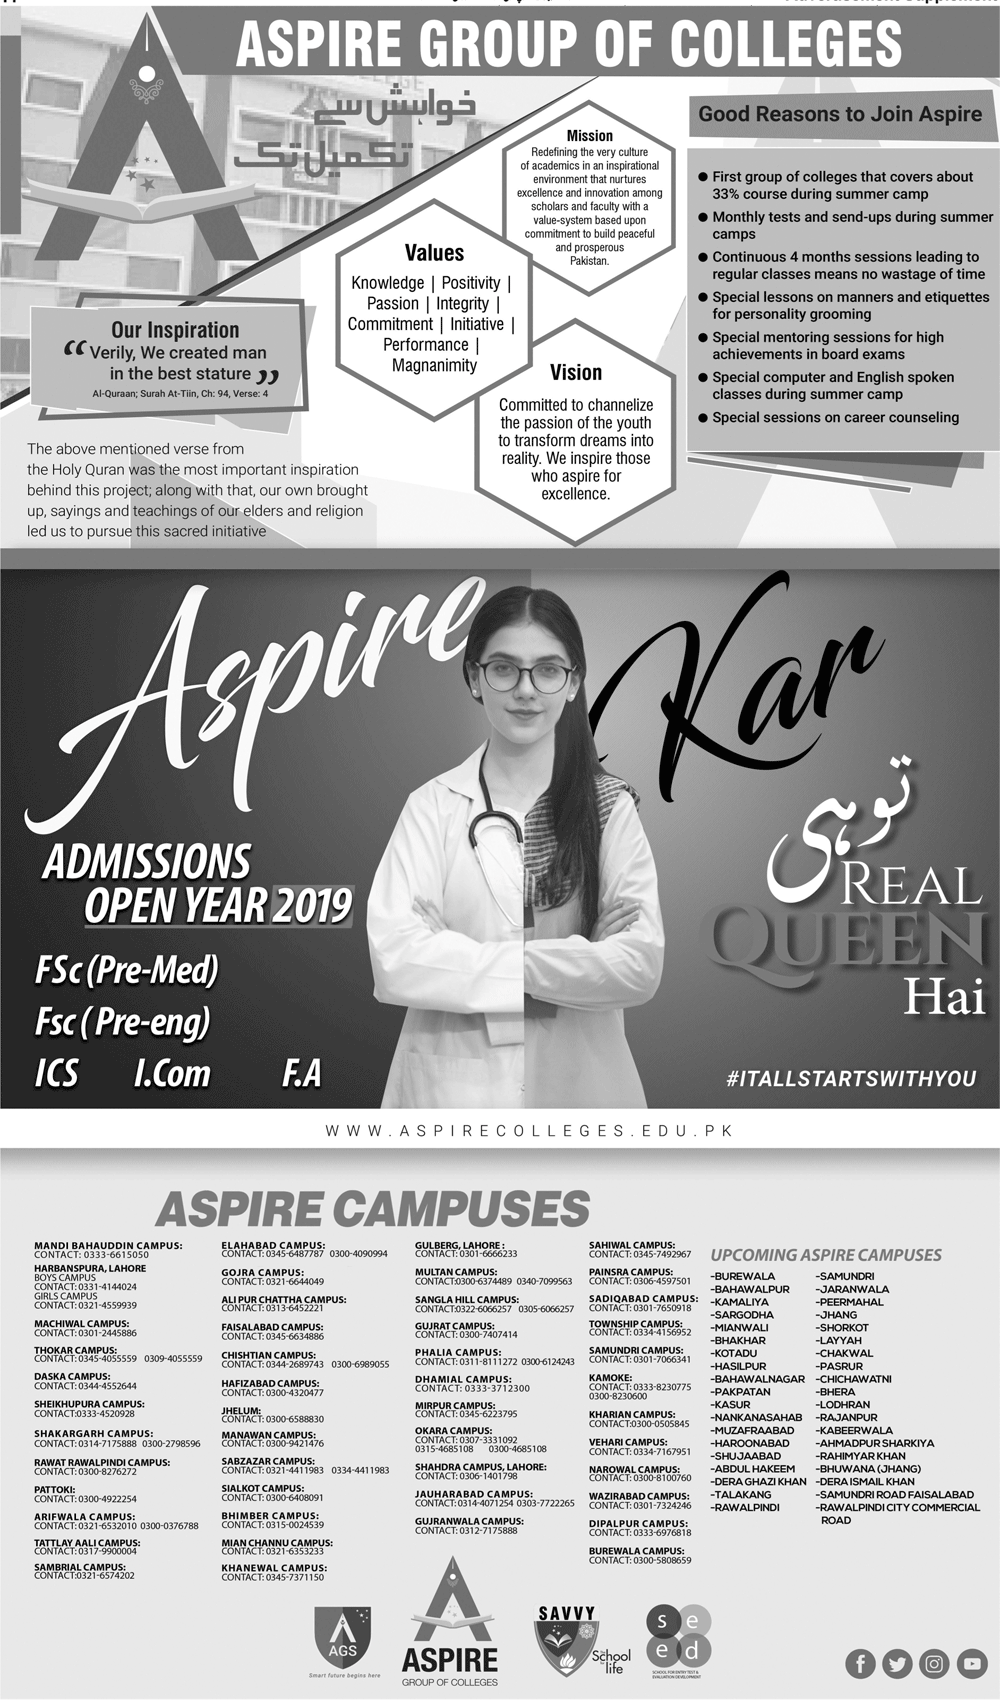 Aspire Group of Colleges 1st Year Admission 2019, Scholarships